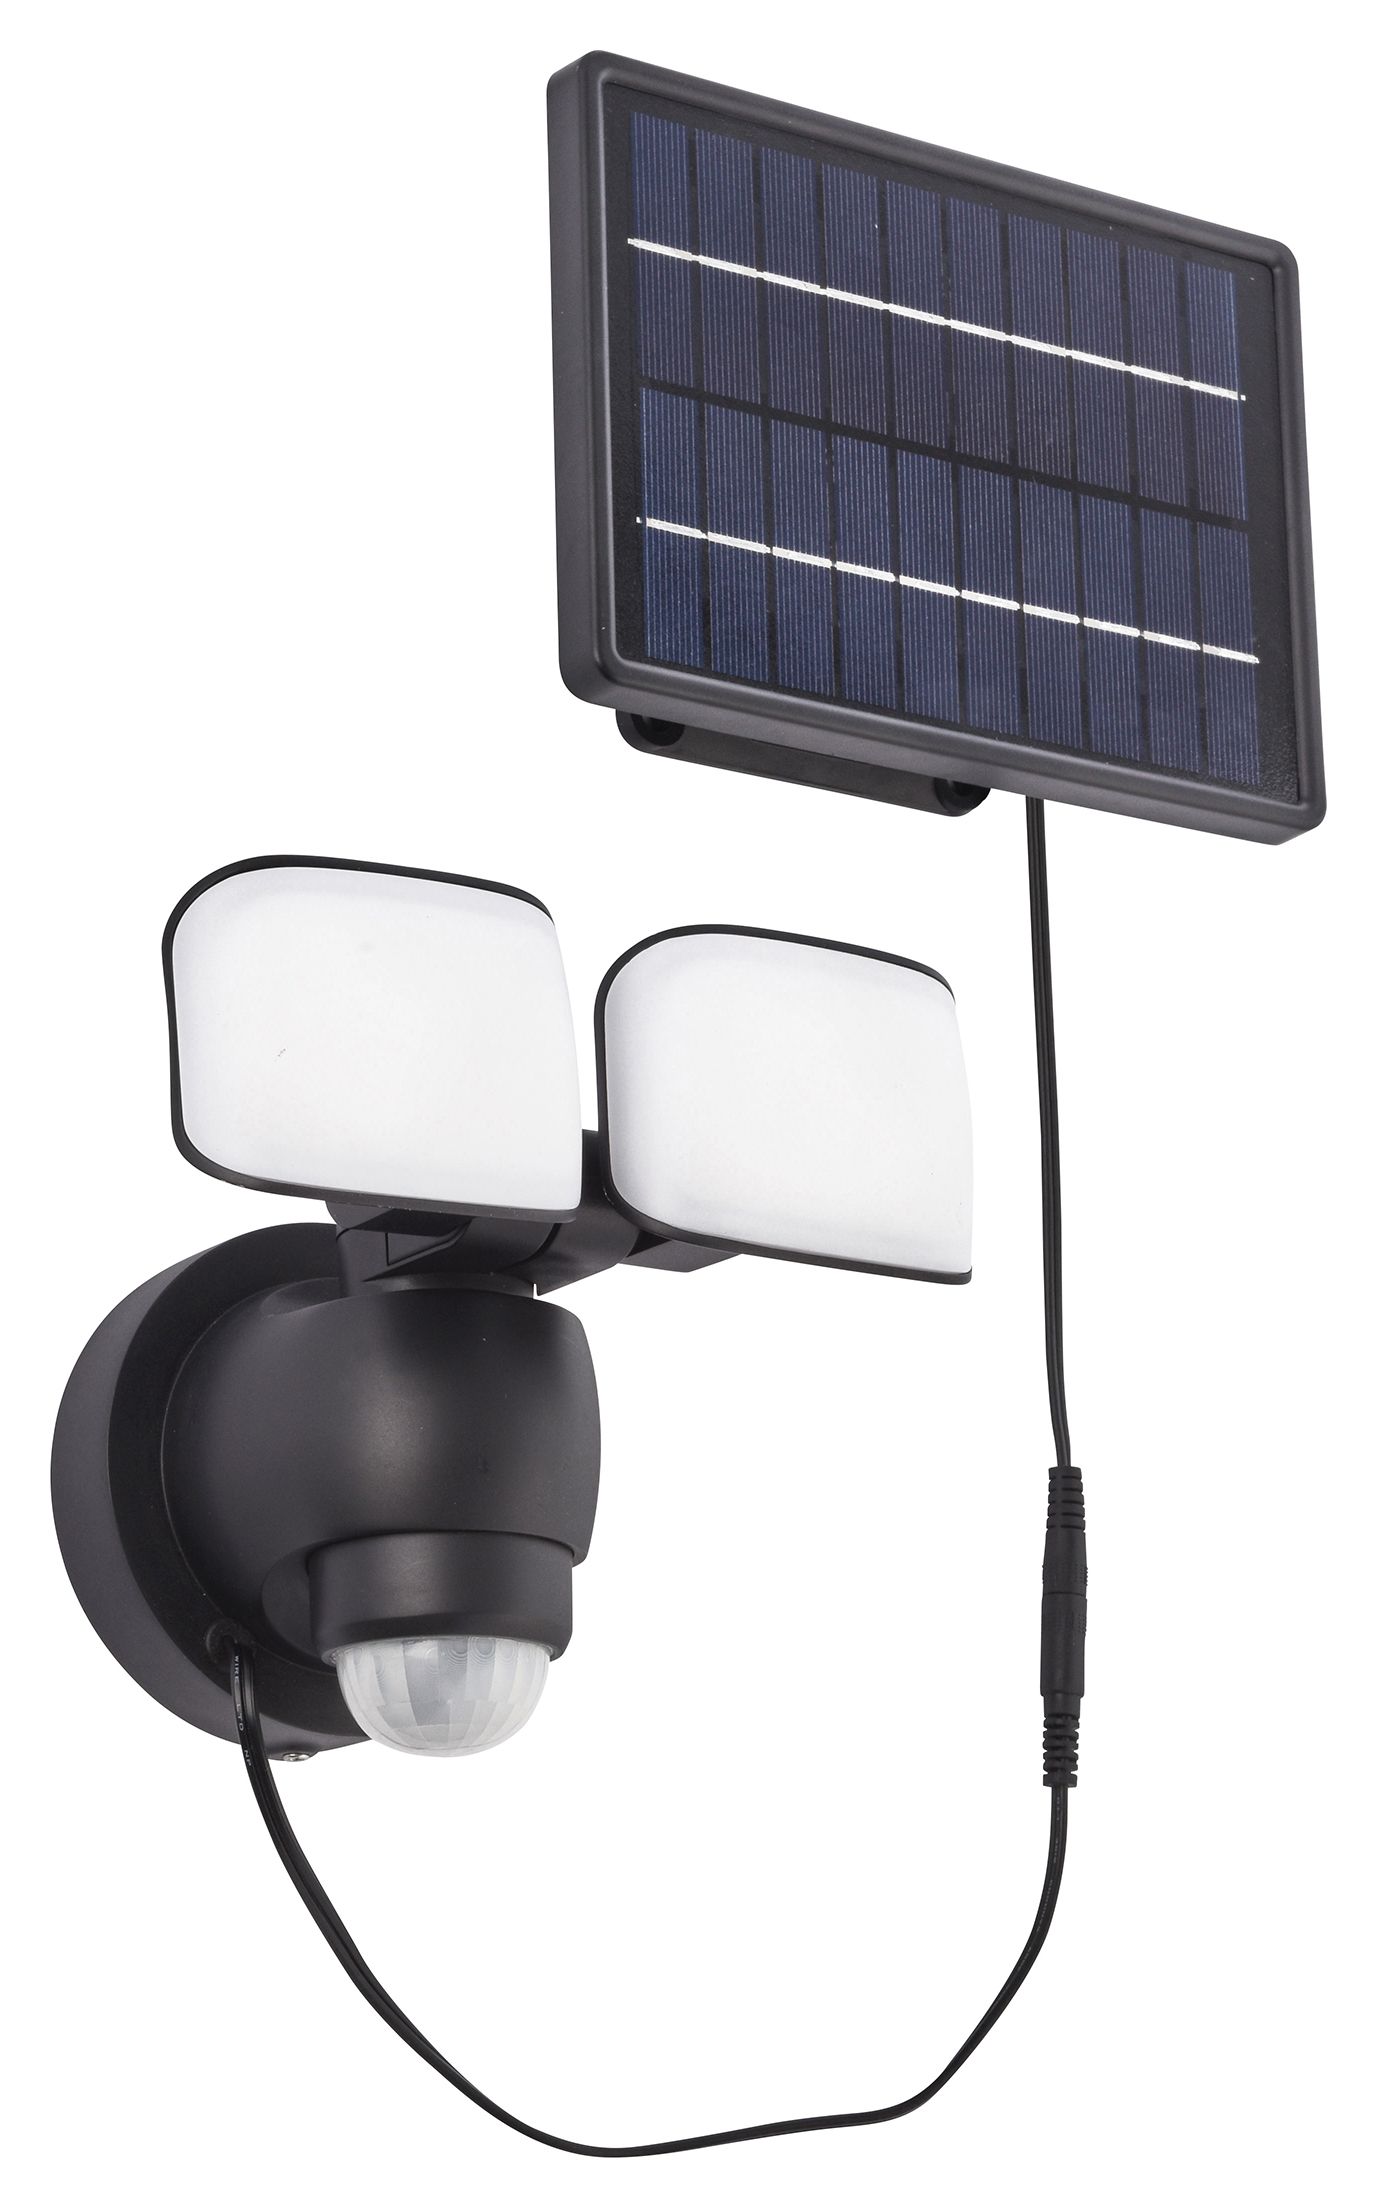 Saxby Omega Solar Abs Plastic & Frosted Polycarbonate Outdoor Security Light - Black